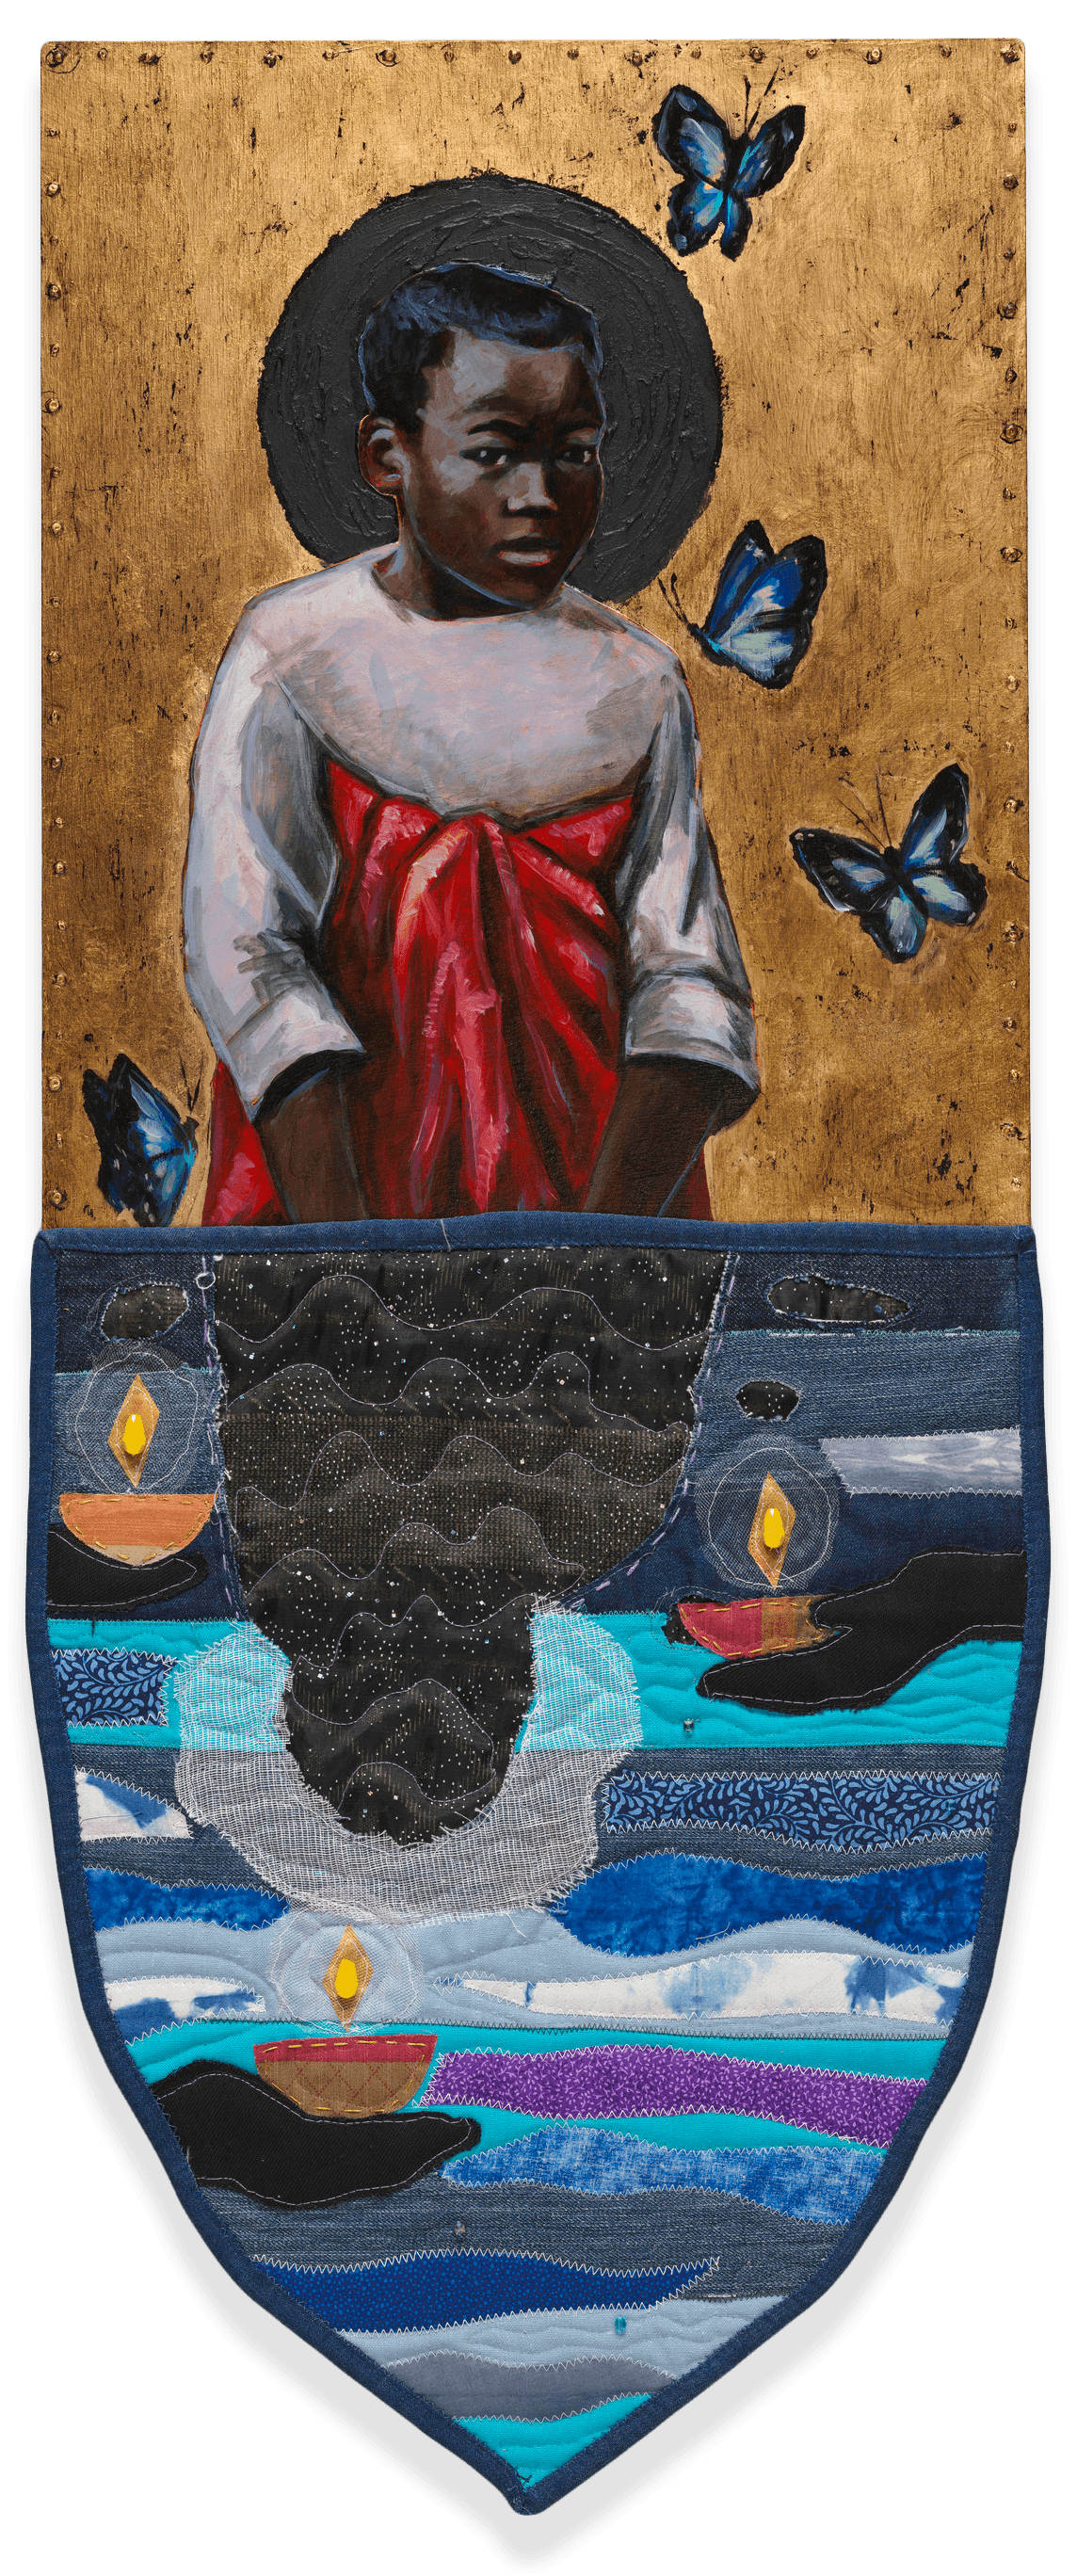 A mixed media piece of art by Stephen Towns that has a painting of a young black girl and her standow reflected in the water.